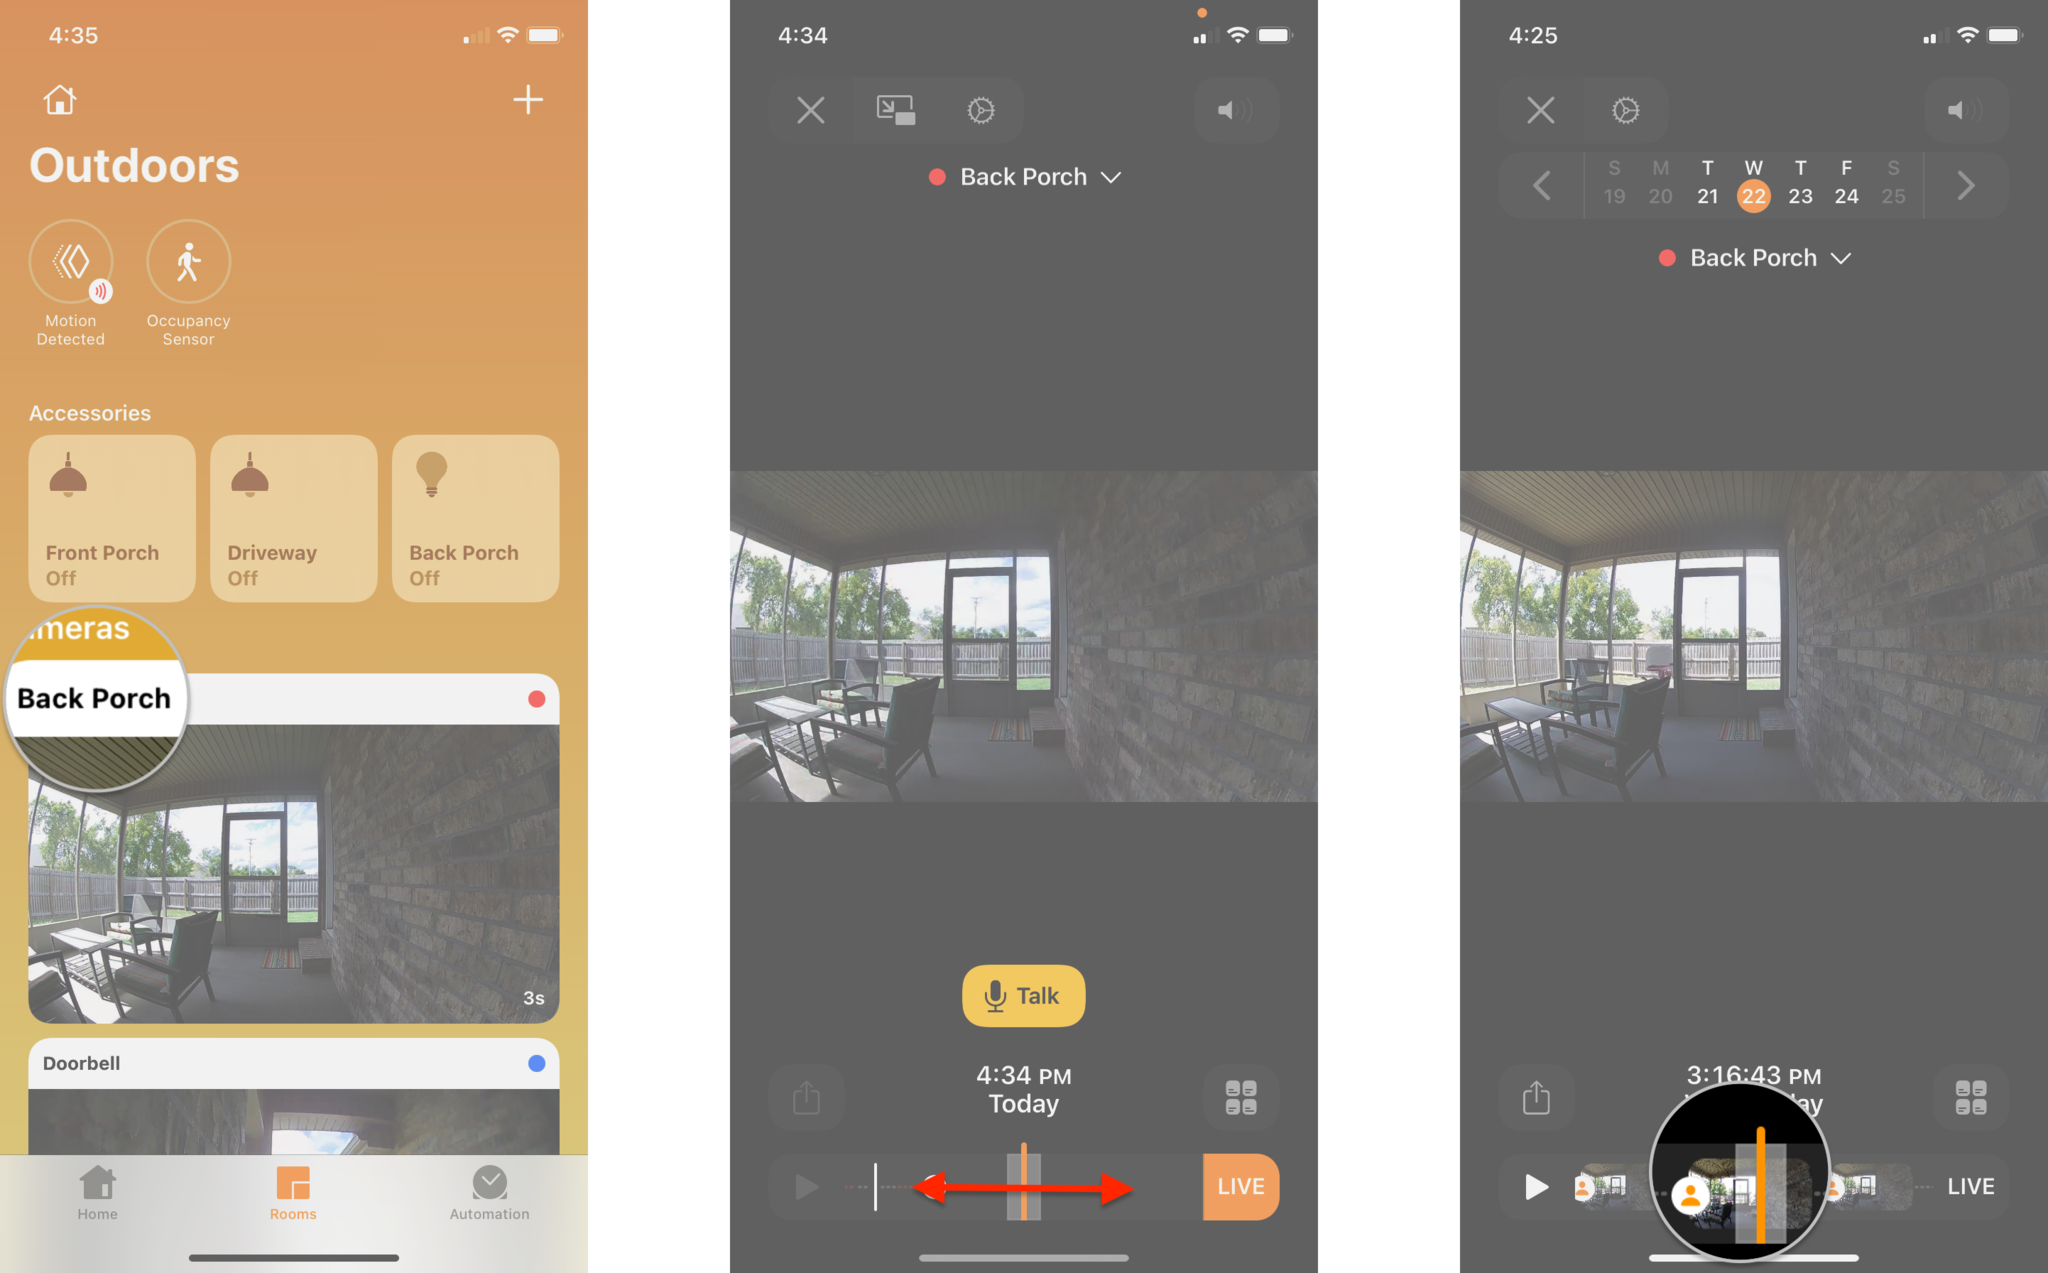 How to share recorded video in the Home app on the iPhone by showing steps: Tap on the Thumbnail Image for your Camera, Swipe to the Left or Right on the Timeline, Tap on a Motion Event